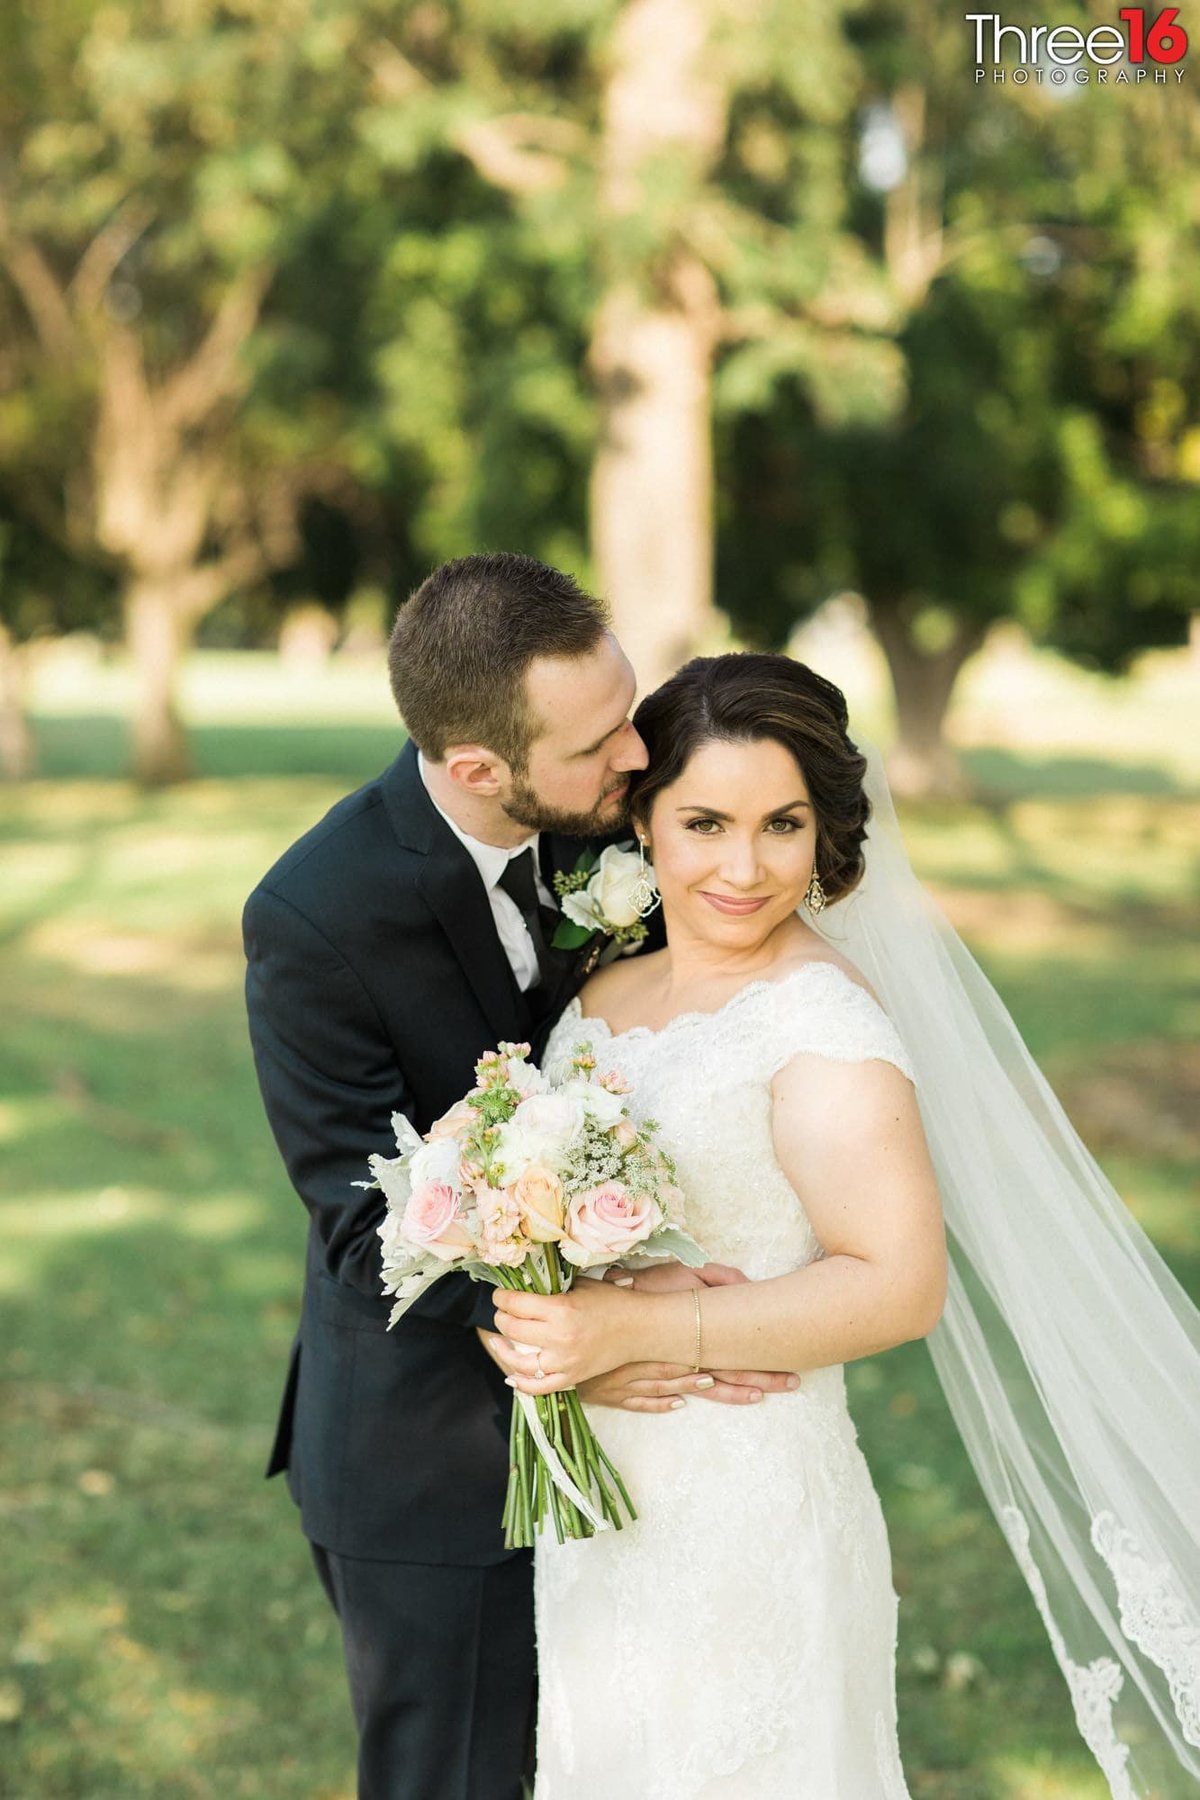 Groom whispers into his Bride's ear during the photo session